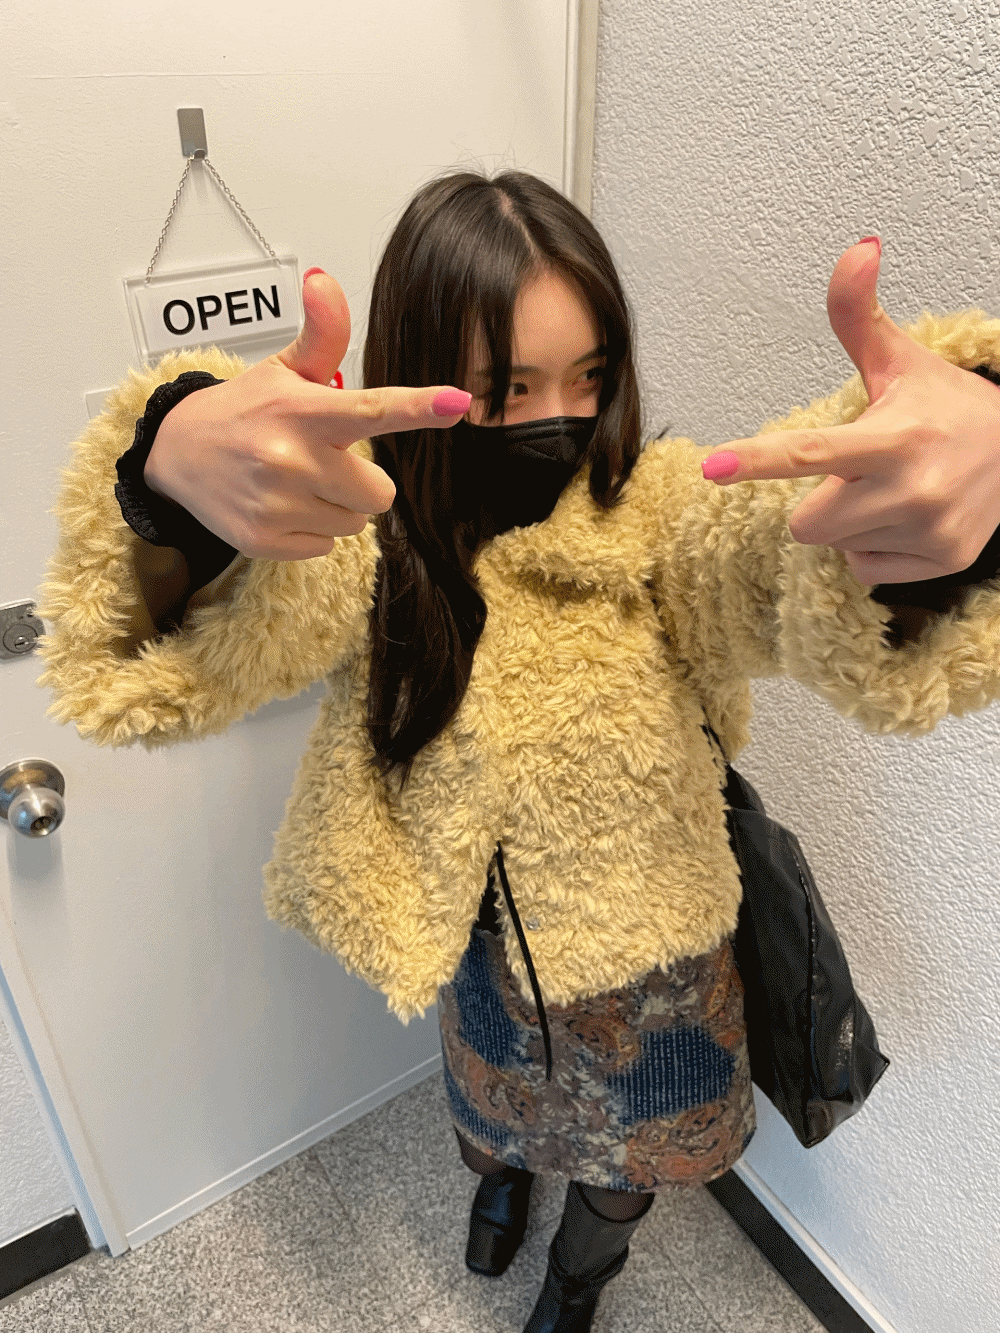 (New컬러!) (재입고!) [Outer] Cream Fur Jacket / 3 colors